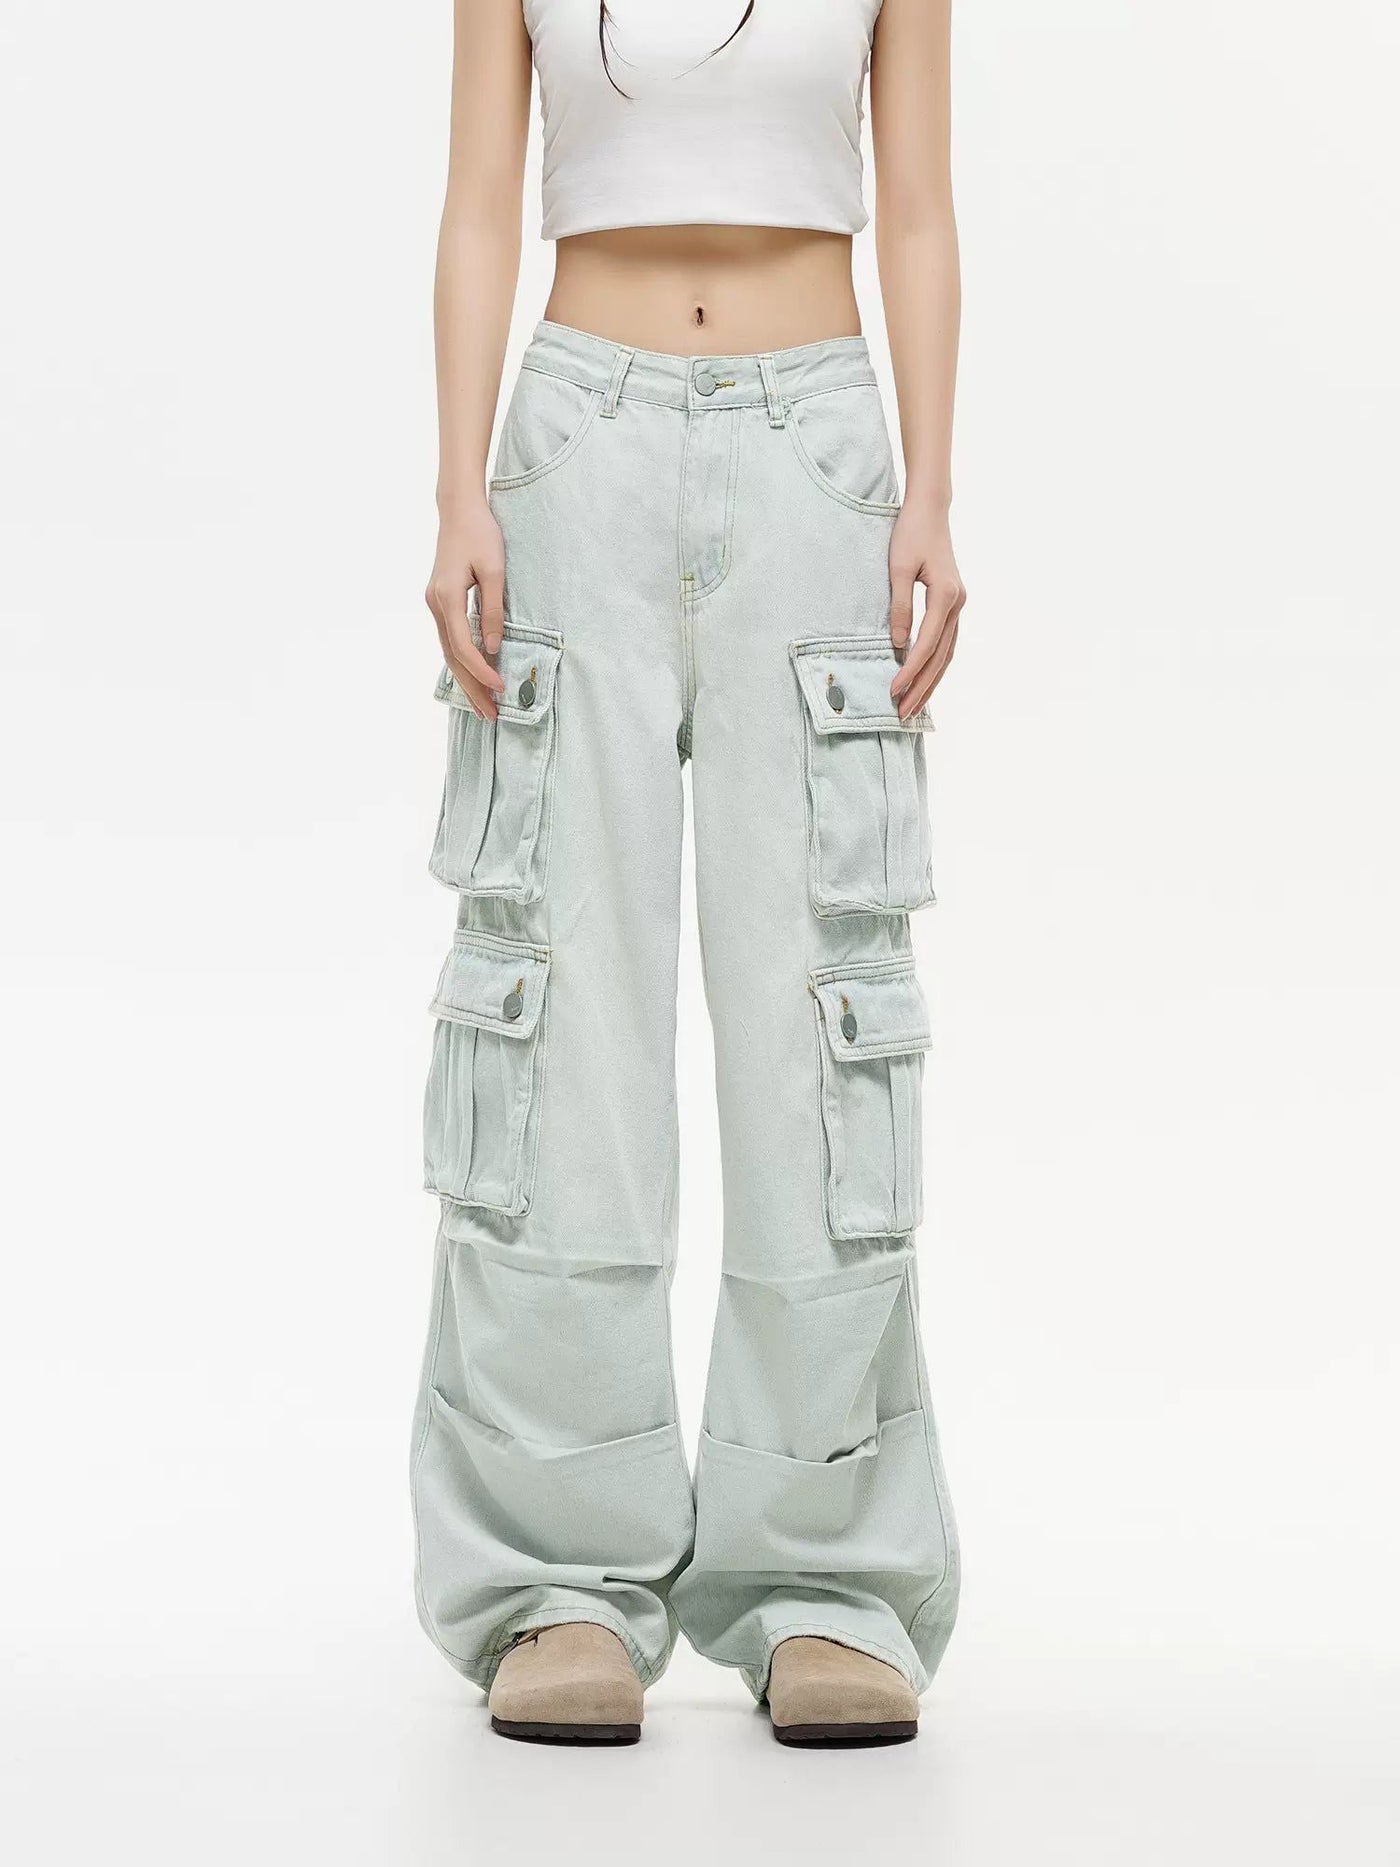 Buttoned Multi-Pocket Jeans Korean Street Fashion Jeans By Made Extreme Shop Online at OH Vault